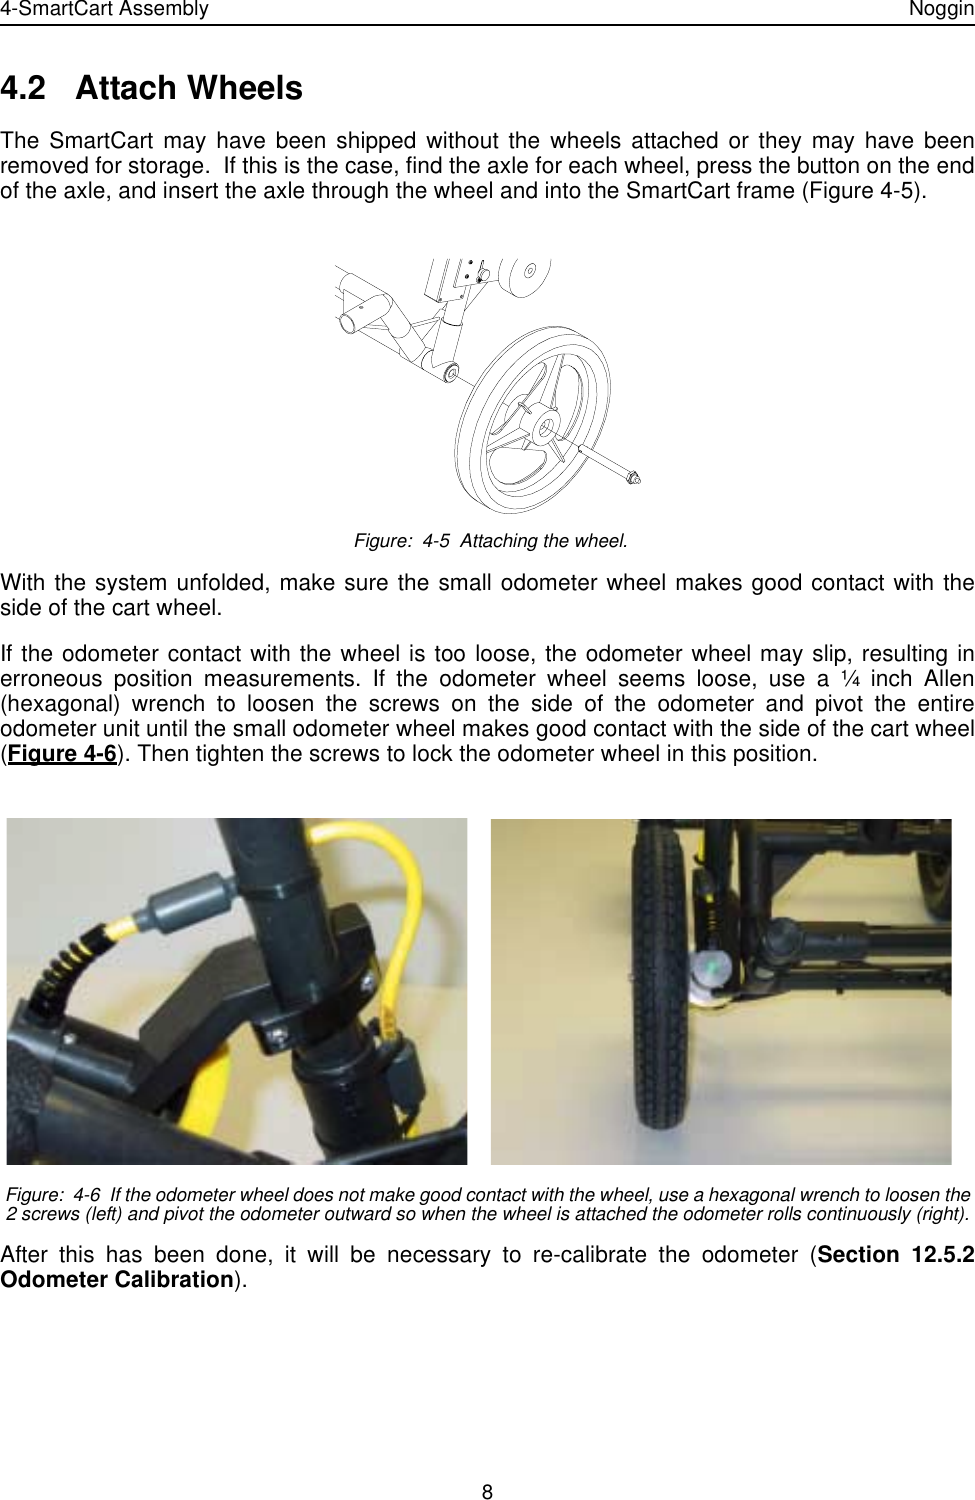 4-SmartCart Assembly Noggin84.2 Attach WheelsThe SmartCart may have been shipped without the wheels attached or they may have beenremoved for storage.  If this is the case, find the axle for each wheel, press the button on the endof the axle, and insert the axle through the wheel and into the SmartCart frame (Figure 4-5). Figure:  4-5  Attaching the wheel.With the system unfolded, make sure the small odometer wheel makes good contact with theside of the cart wheel. If the odometer contact with the wheel is too loose, the odometer wheel may slip, resulting inerroneous position measurements. If the odometer wheel seems loose, use a ¼ inch Allen(hexagonal) wrench to loosen the screws on the side of the odometer and pivot the entireodometer unit until the small odometer wheel makes good contact with the side of the cart wheel(Figure 4-6). Then tighten the screws to lock the odometer wheel in this position.  Figure:  4-6  If the odometer wheel does not make good contact with the wheel, use a hexagonal wrench to loosen the 2 screws (left) and pivot the odometer outward so when the wheel is attached the odometer rolls continuously (right).After this has been done, it will be necessary to re-calibrate the odometer (Section 12.5.2Odometer Calibration).